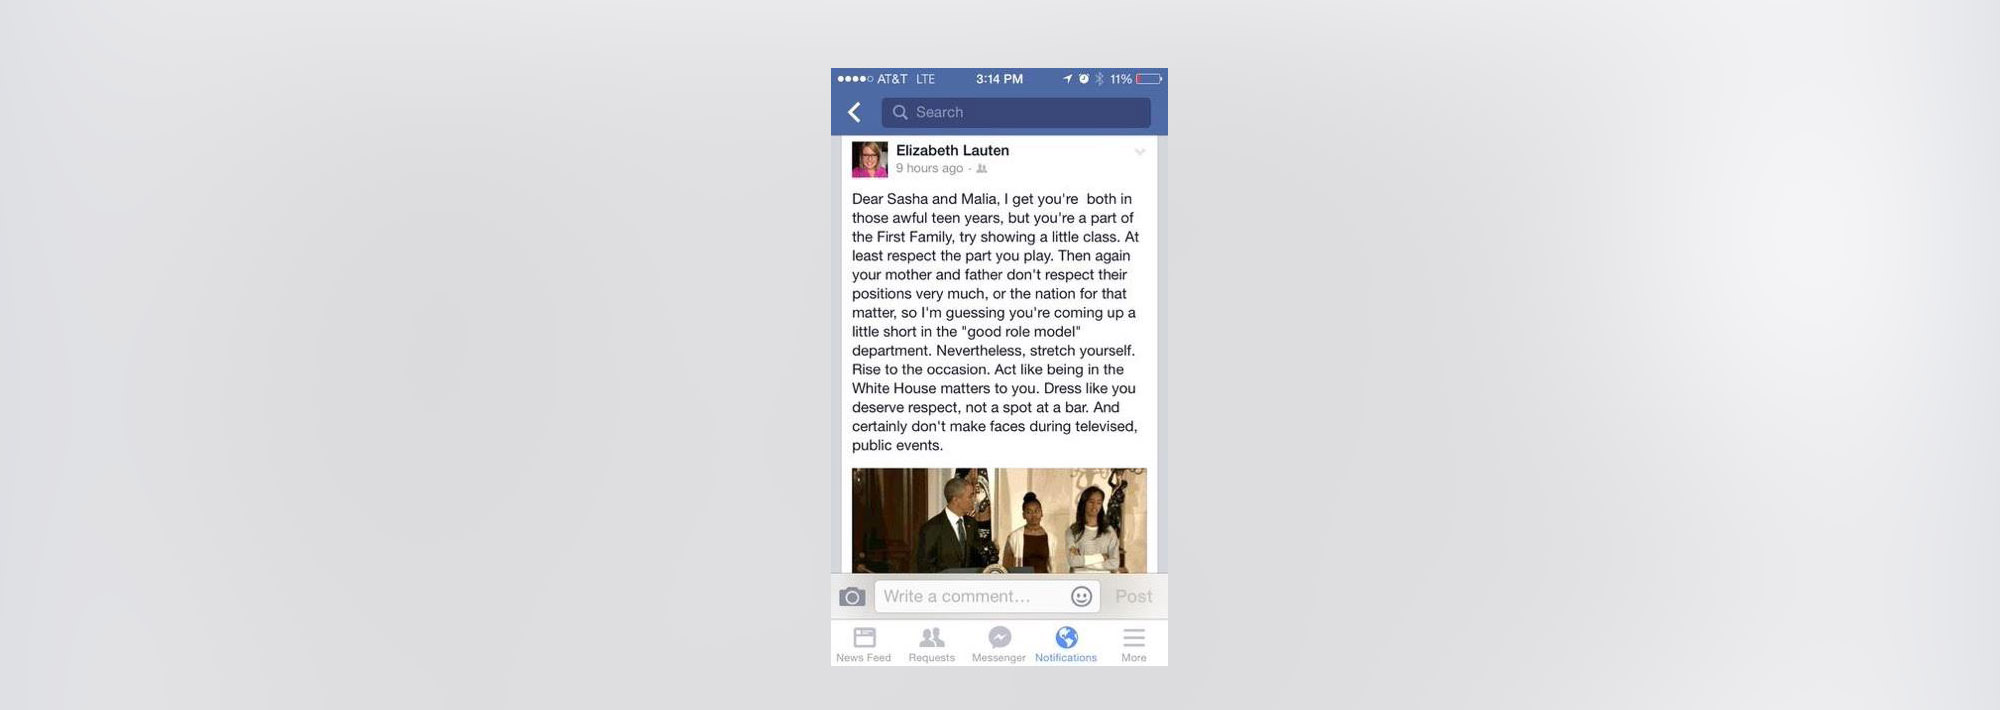 PHOTO: Elizabeth Lauten posted this status to Facebook criticizing Sasha and Malia Obama for their conduct during the turkey pardoning ceremony at the White House.